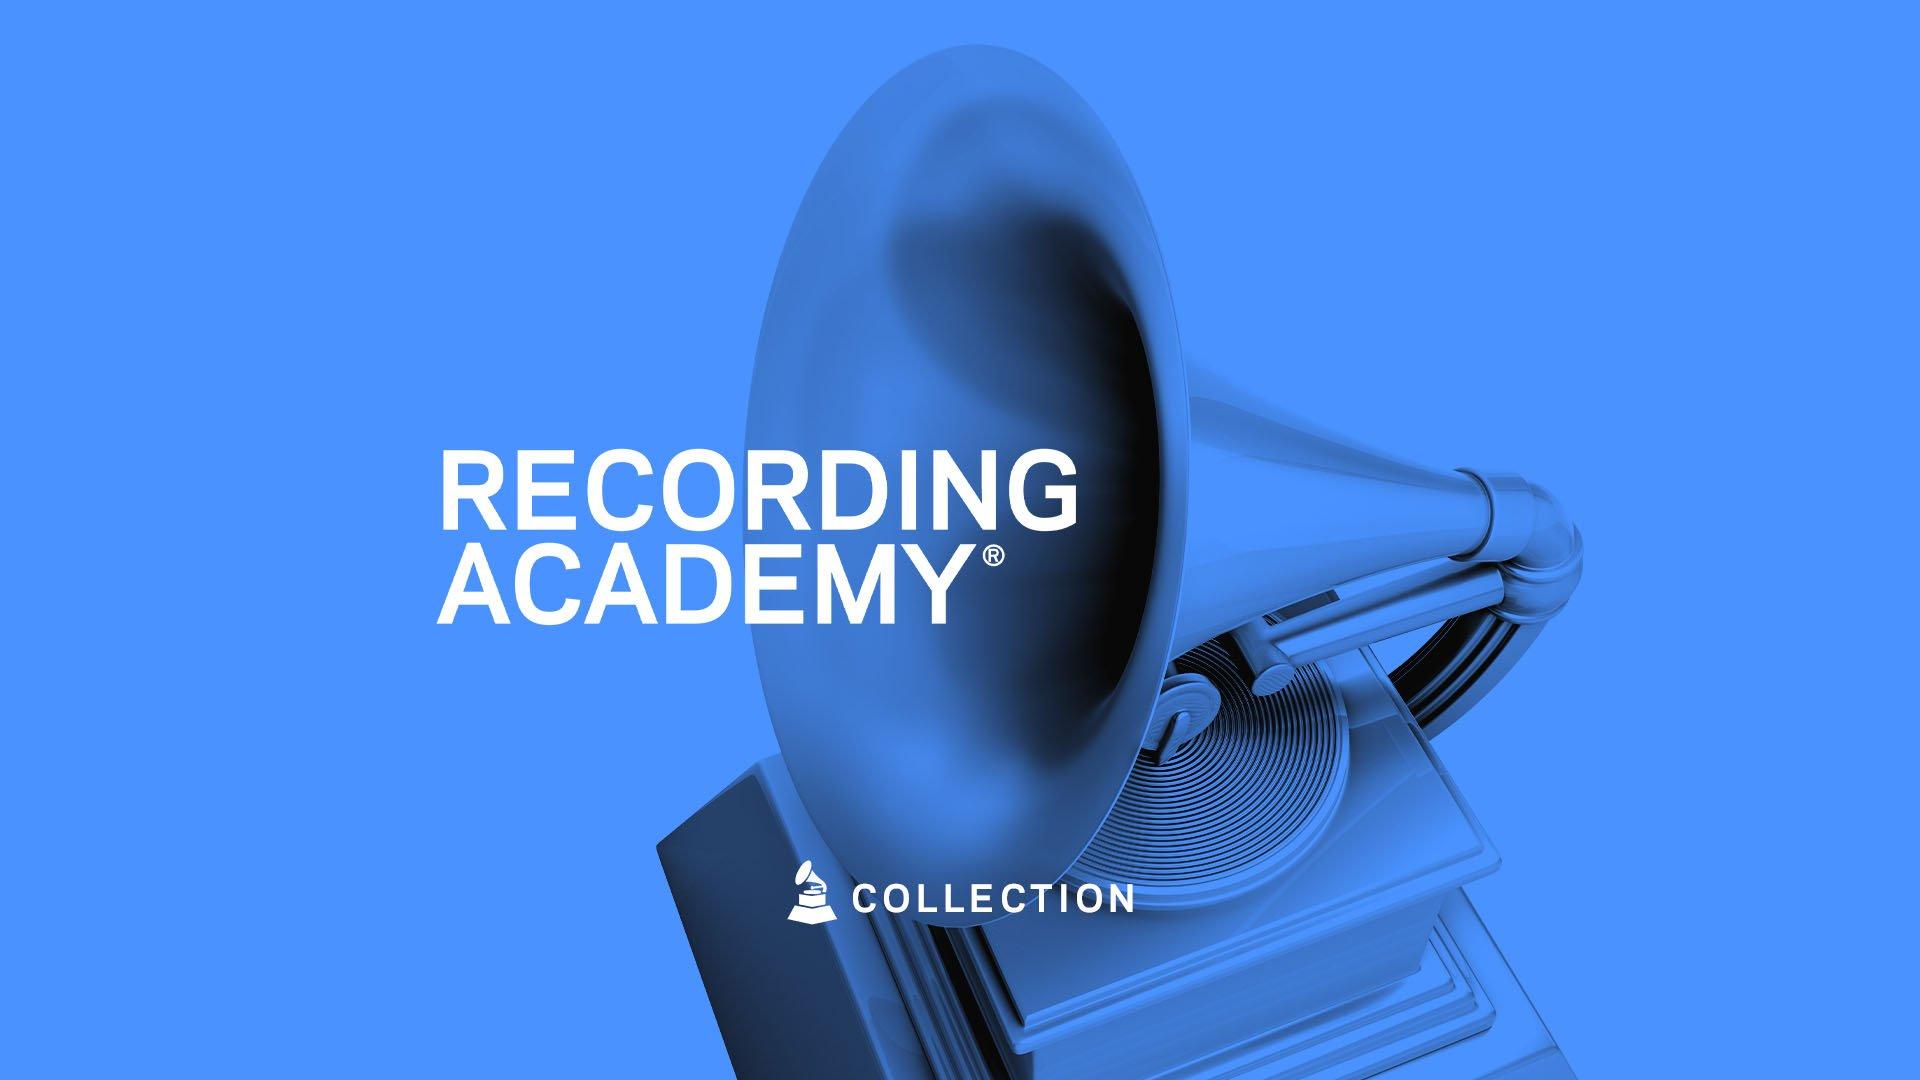 An image featuring the official logo of the Recording Recording. The image features a gray GRAMMY Award statue and the words "Recording Academy" and "Collection" written in white against a light-blue background.